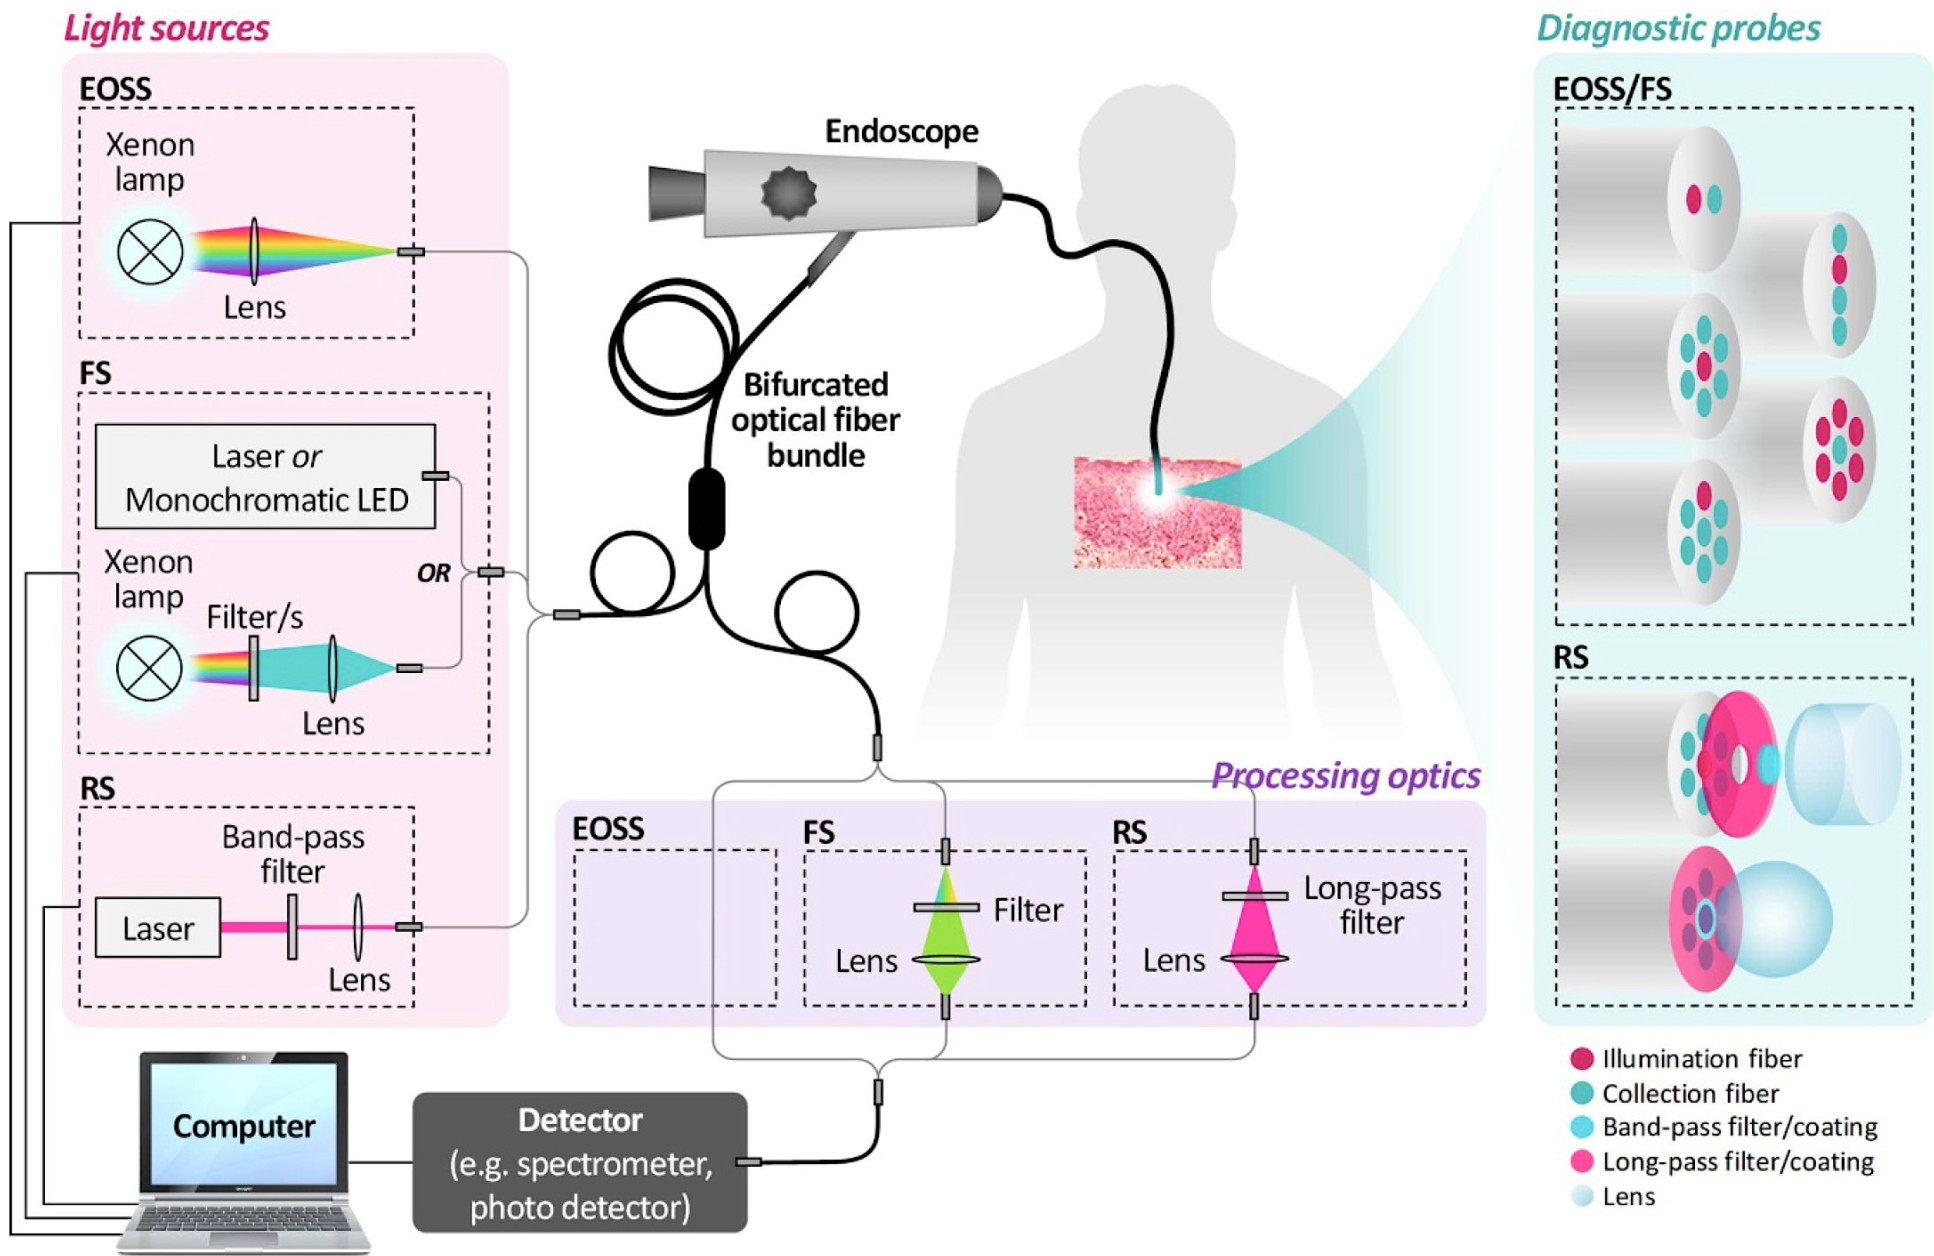 A comprehensive schematic of implementation settings of the point-based in vivo optical diagnostic techniques; elastic optical scattering spectroscopy (EOSS), fluorescence spectroscopy (FS), and Raman spectroscopy (RS).